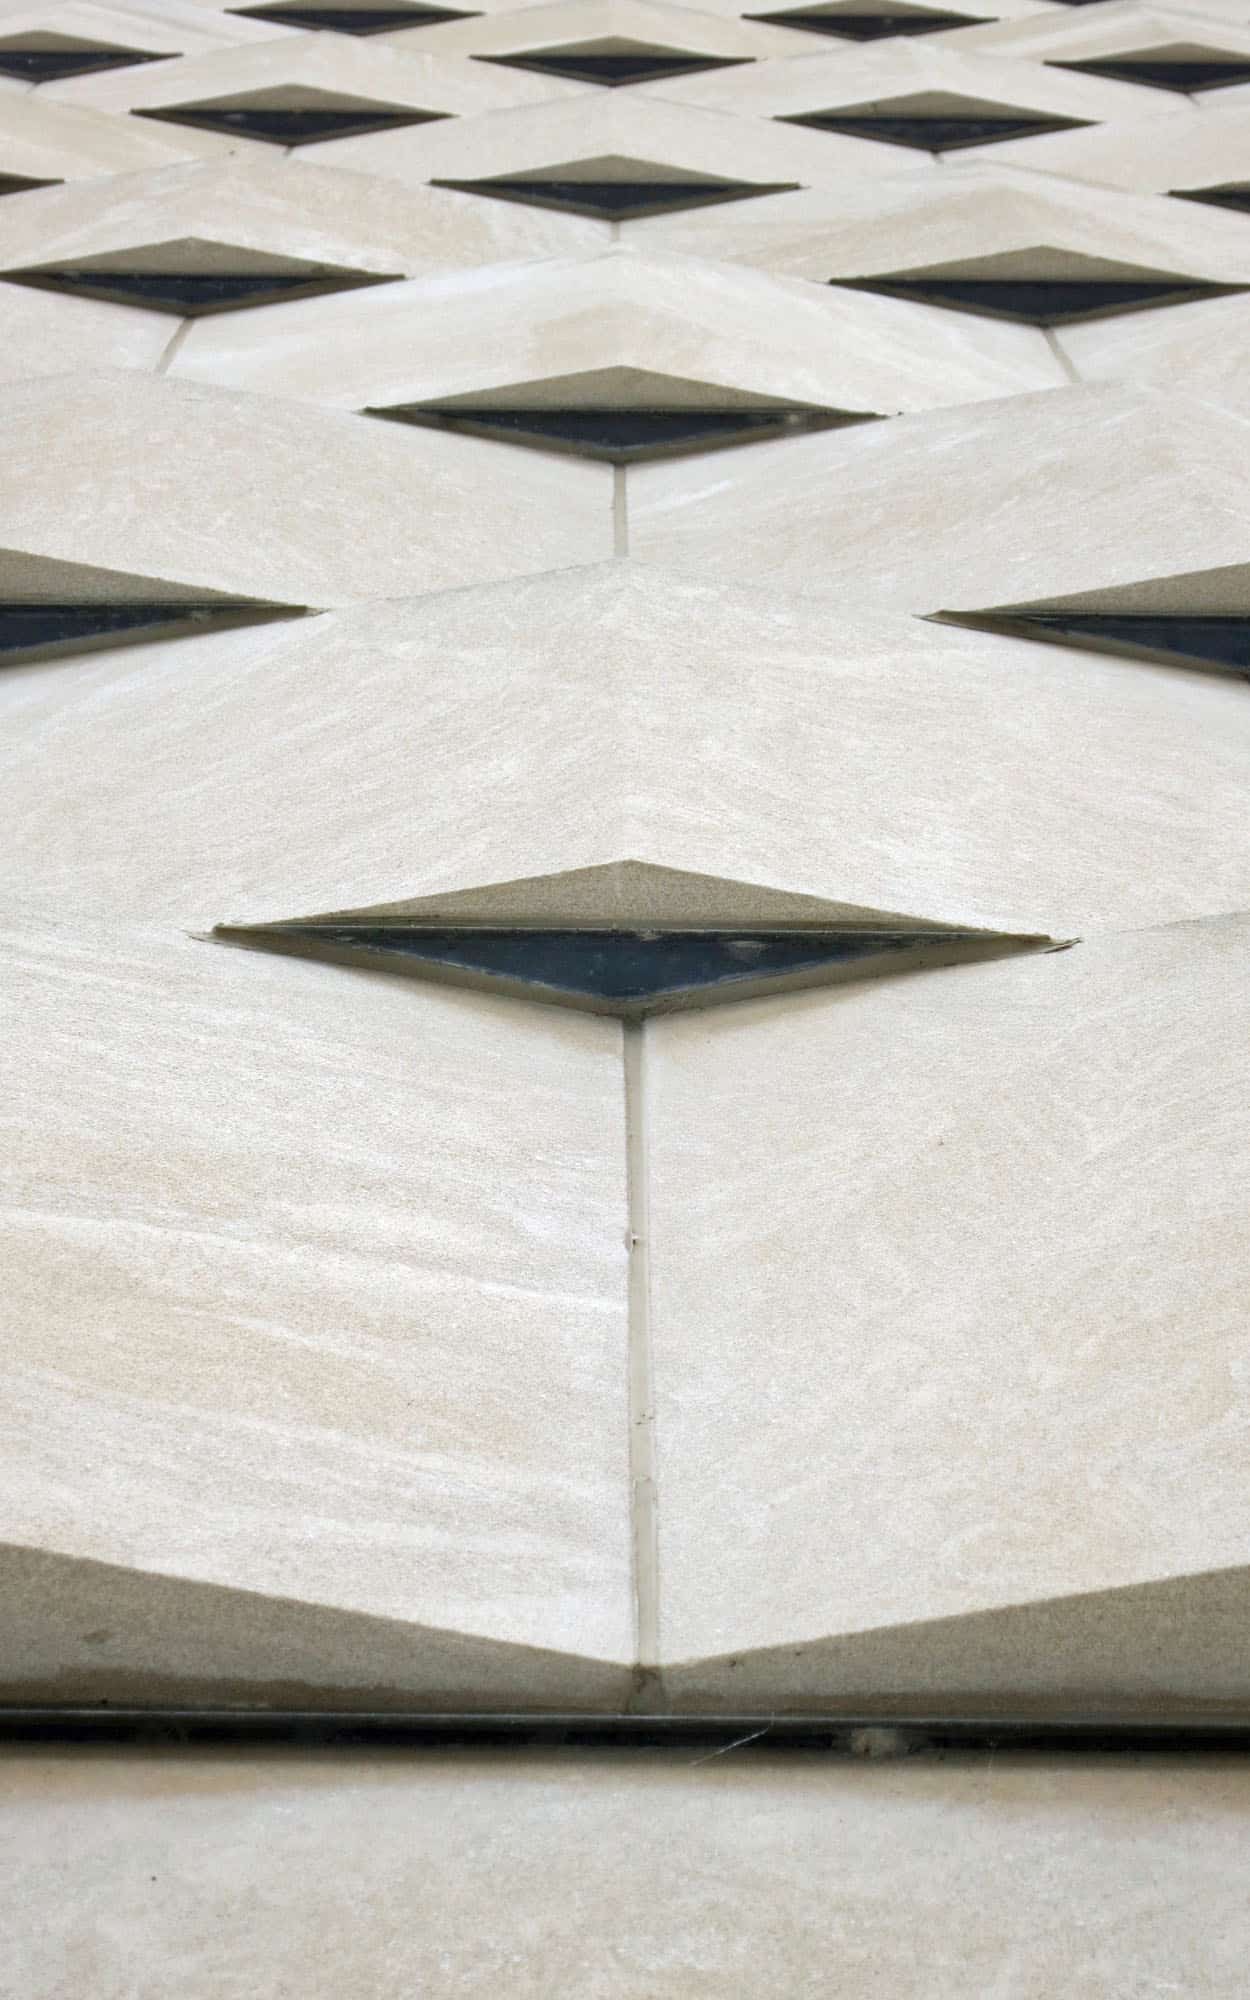 The limestone cladding of the justice building with its subtle basket-weave effect